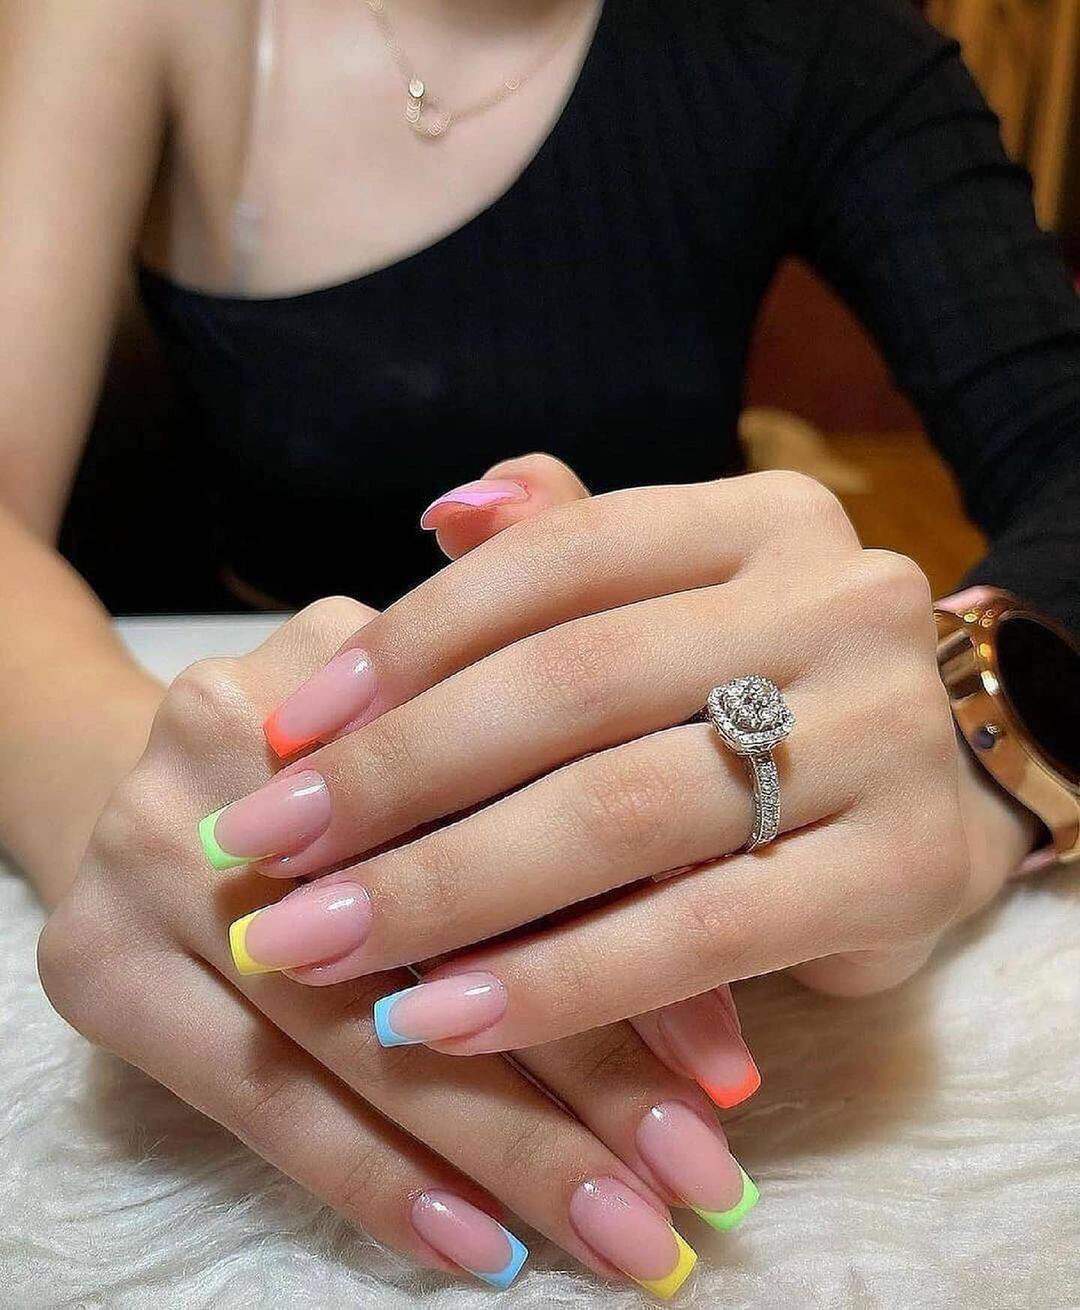 35 Cute Summer Nails To Rock For Women In 2021 images 32